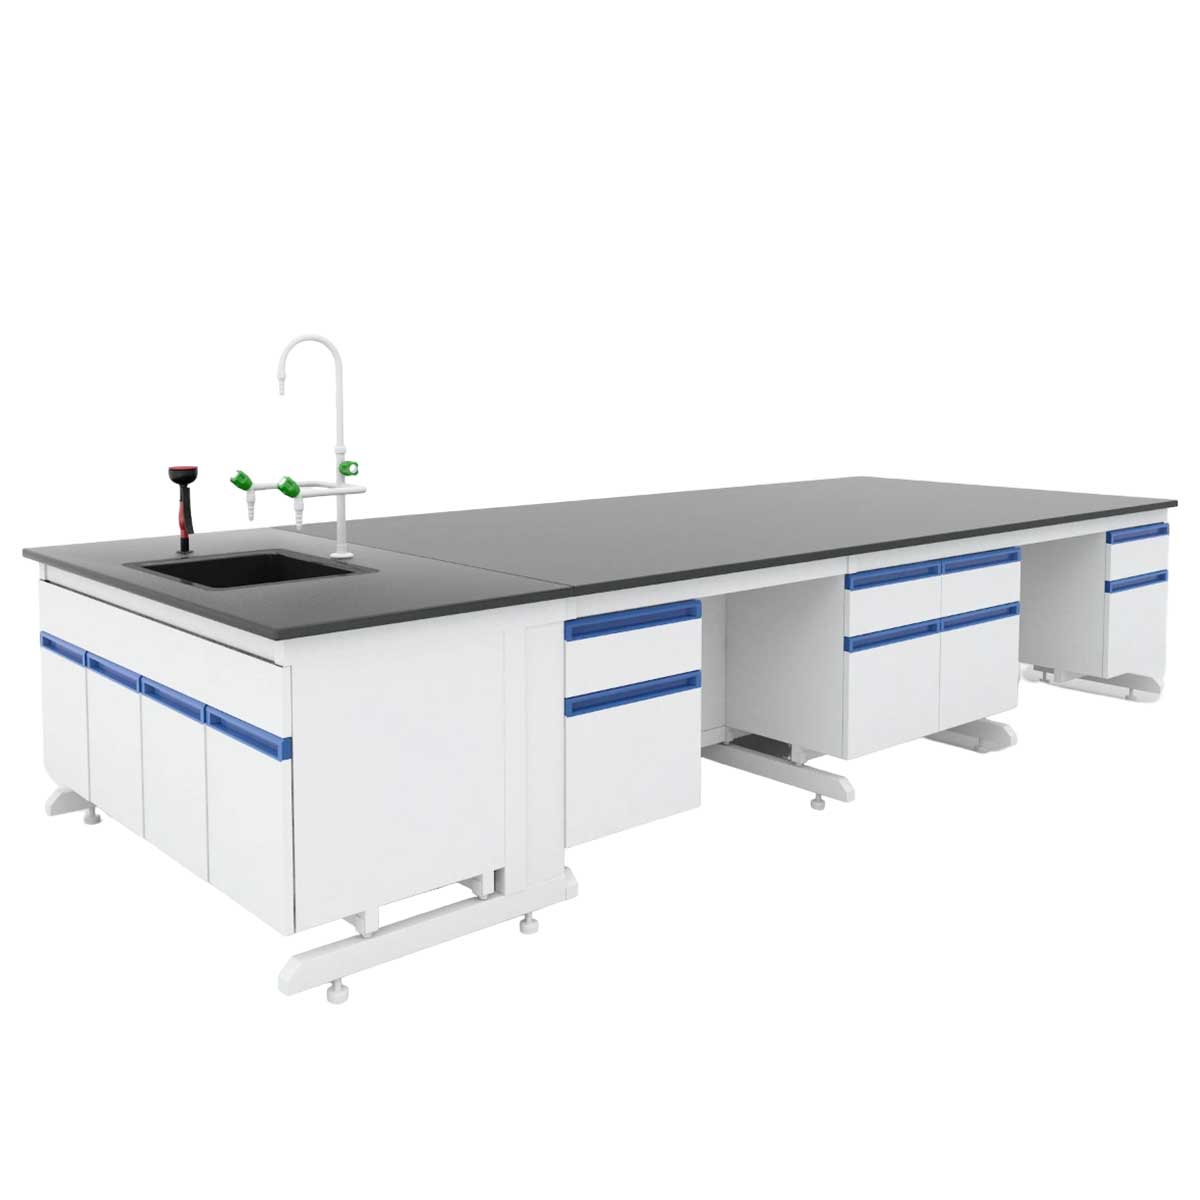 Physics Lab Furniture Manufacturers, Suppliers in Okhla